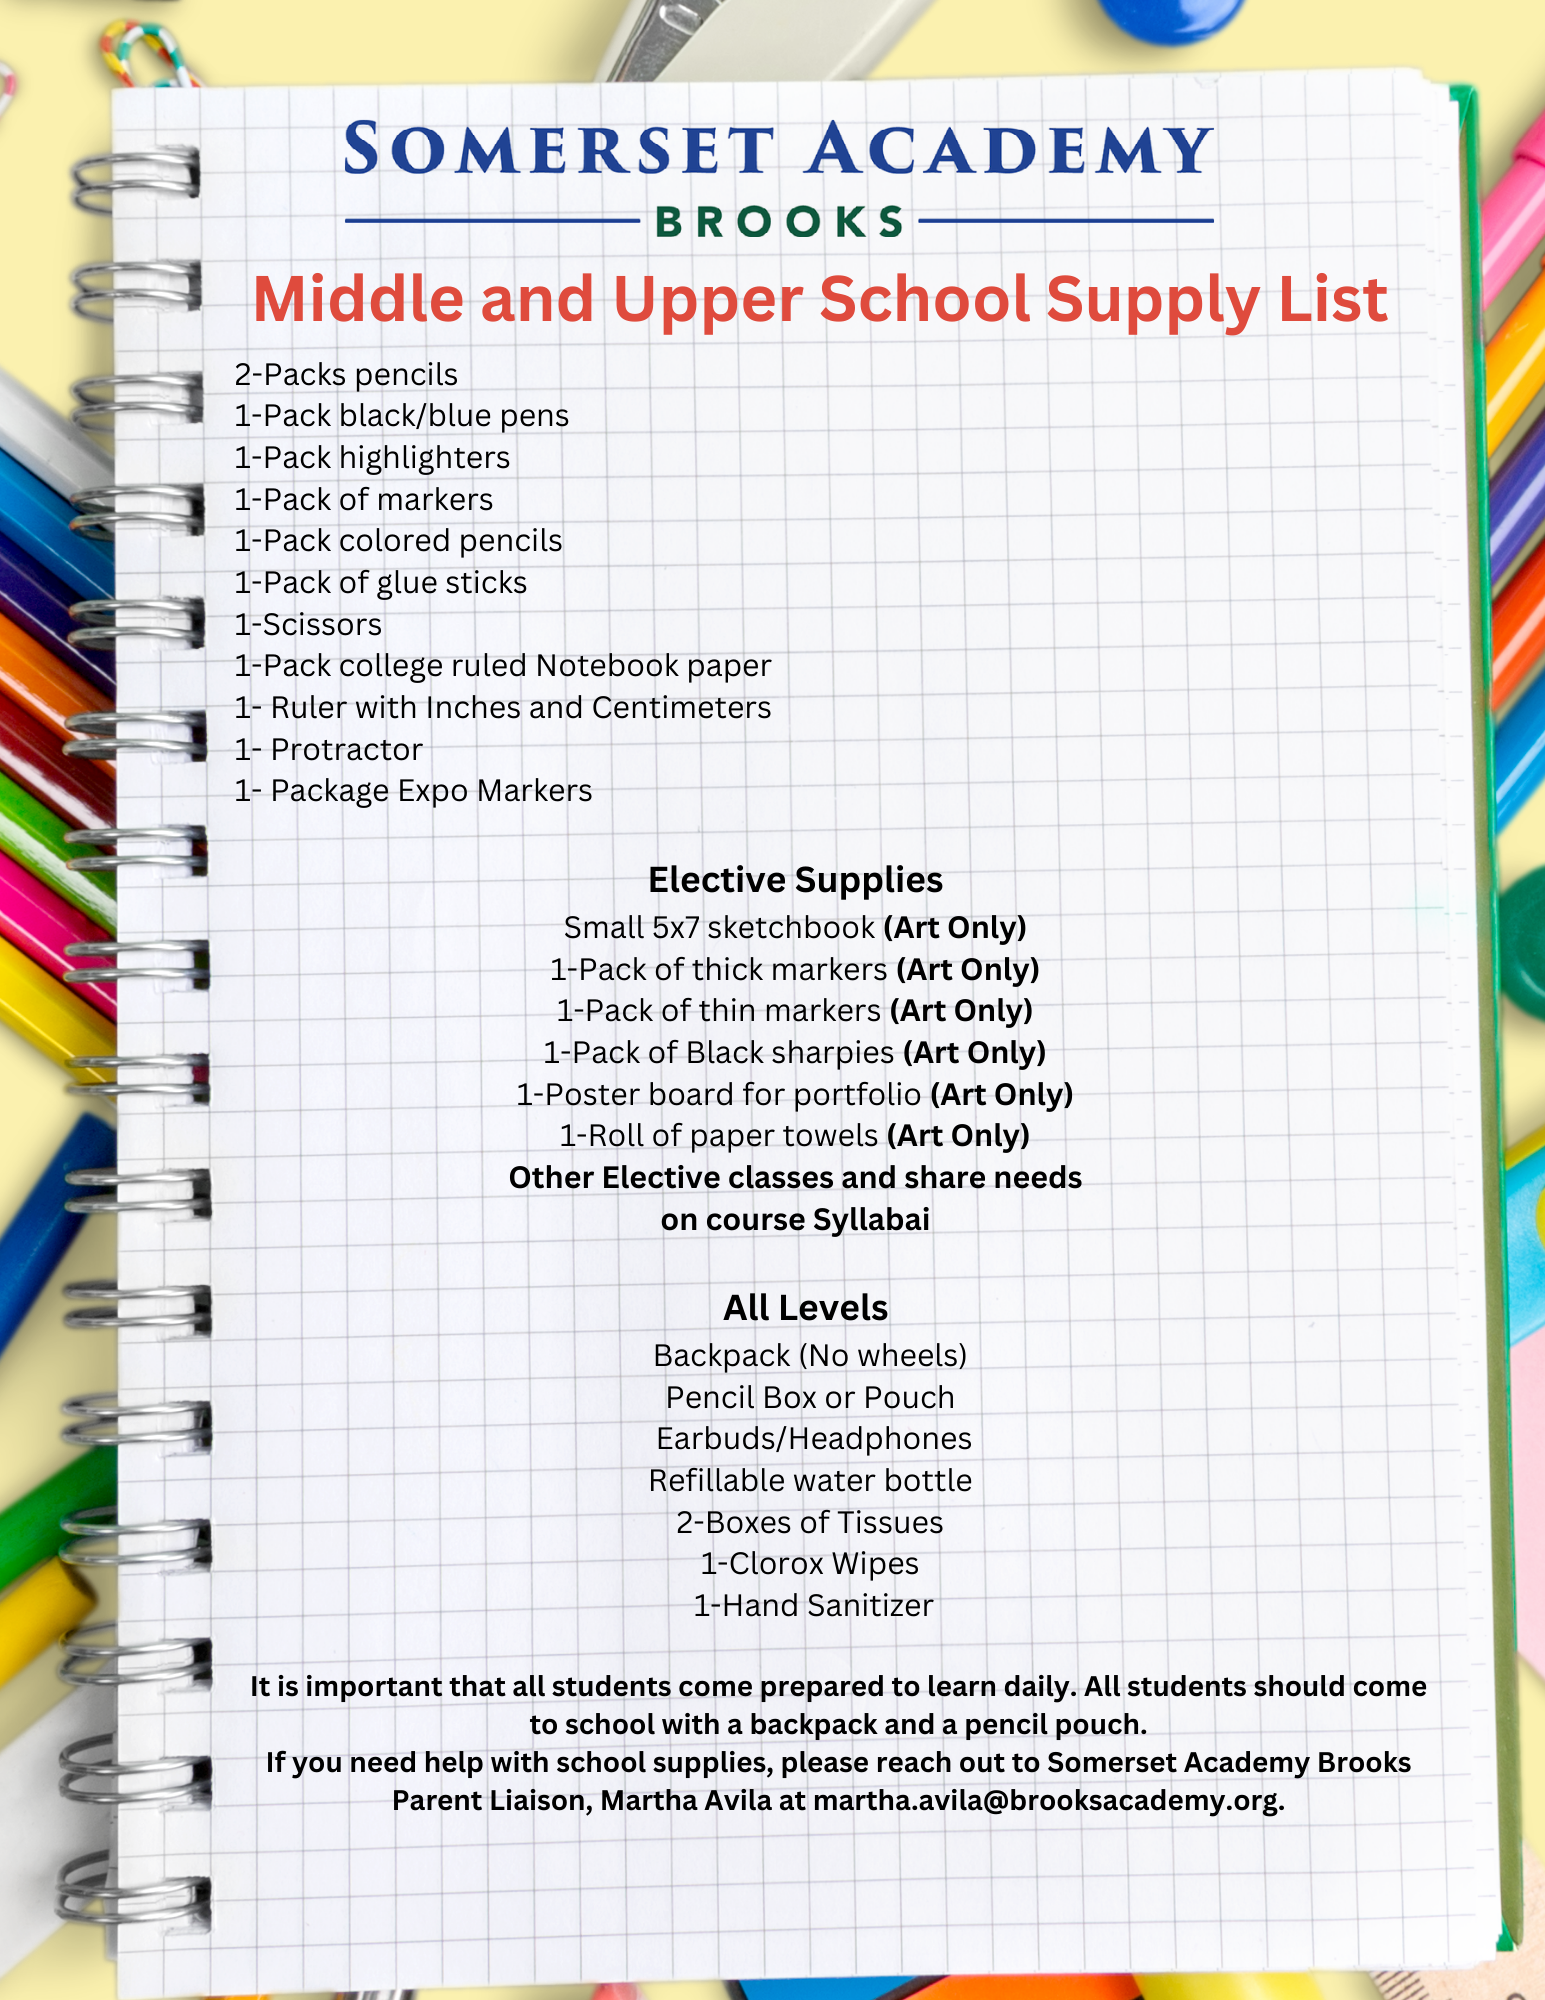 FAQs / What is the school supply list?